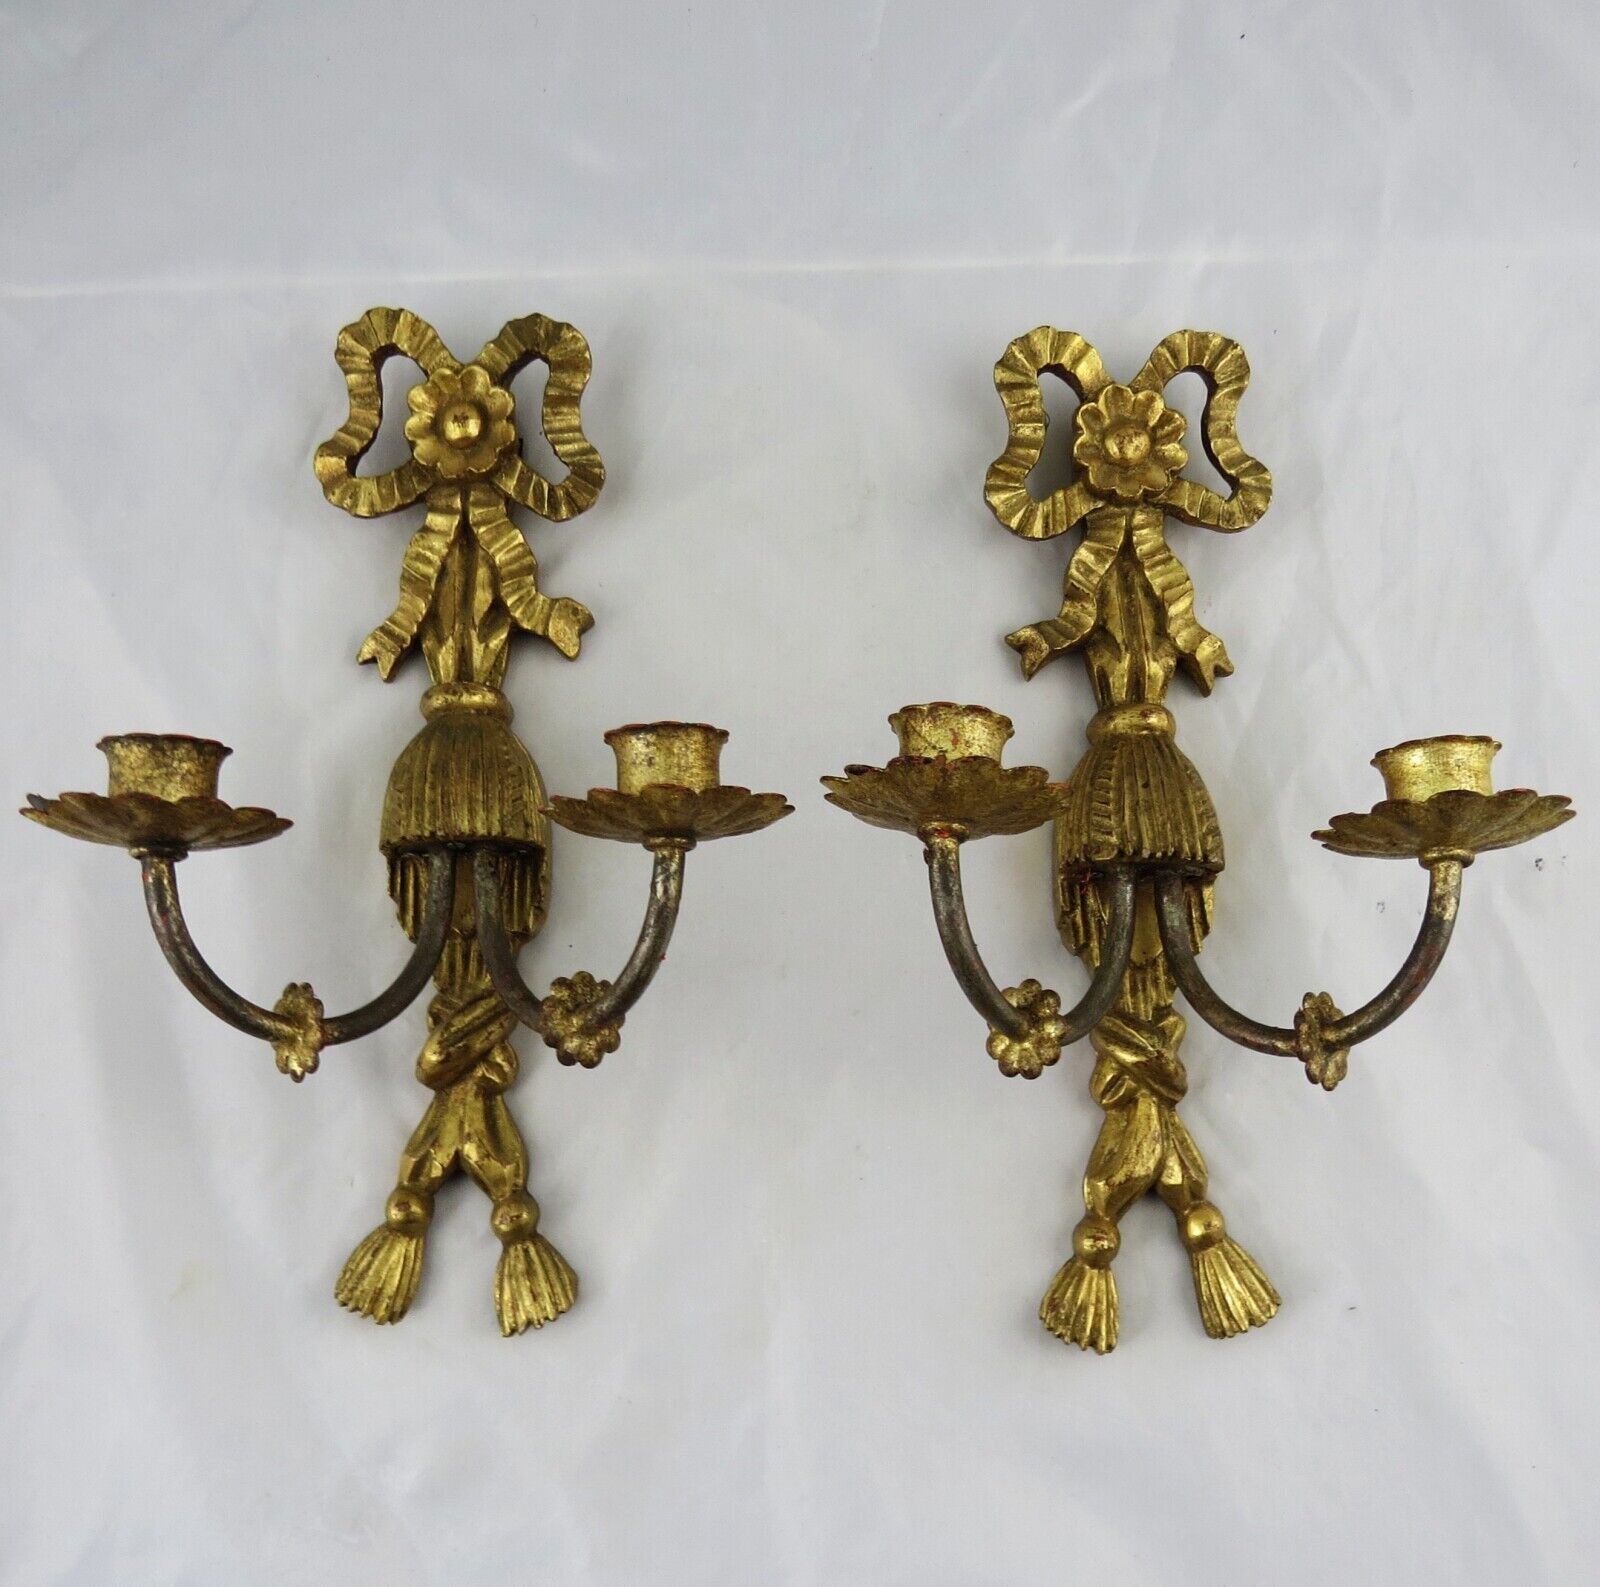 Antique Pair of Italian Carved & Gilt Wood Sconces 12-1/2